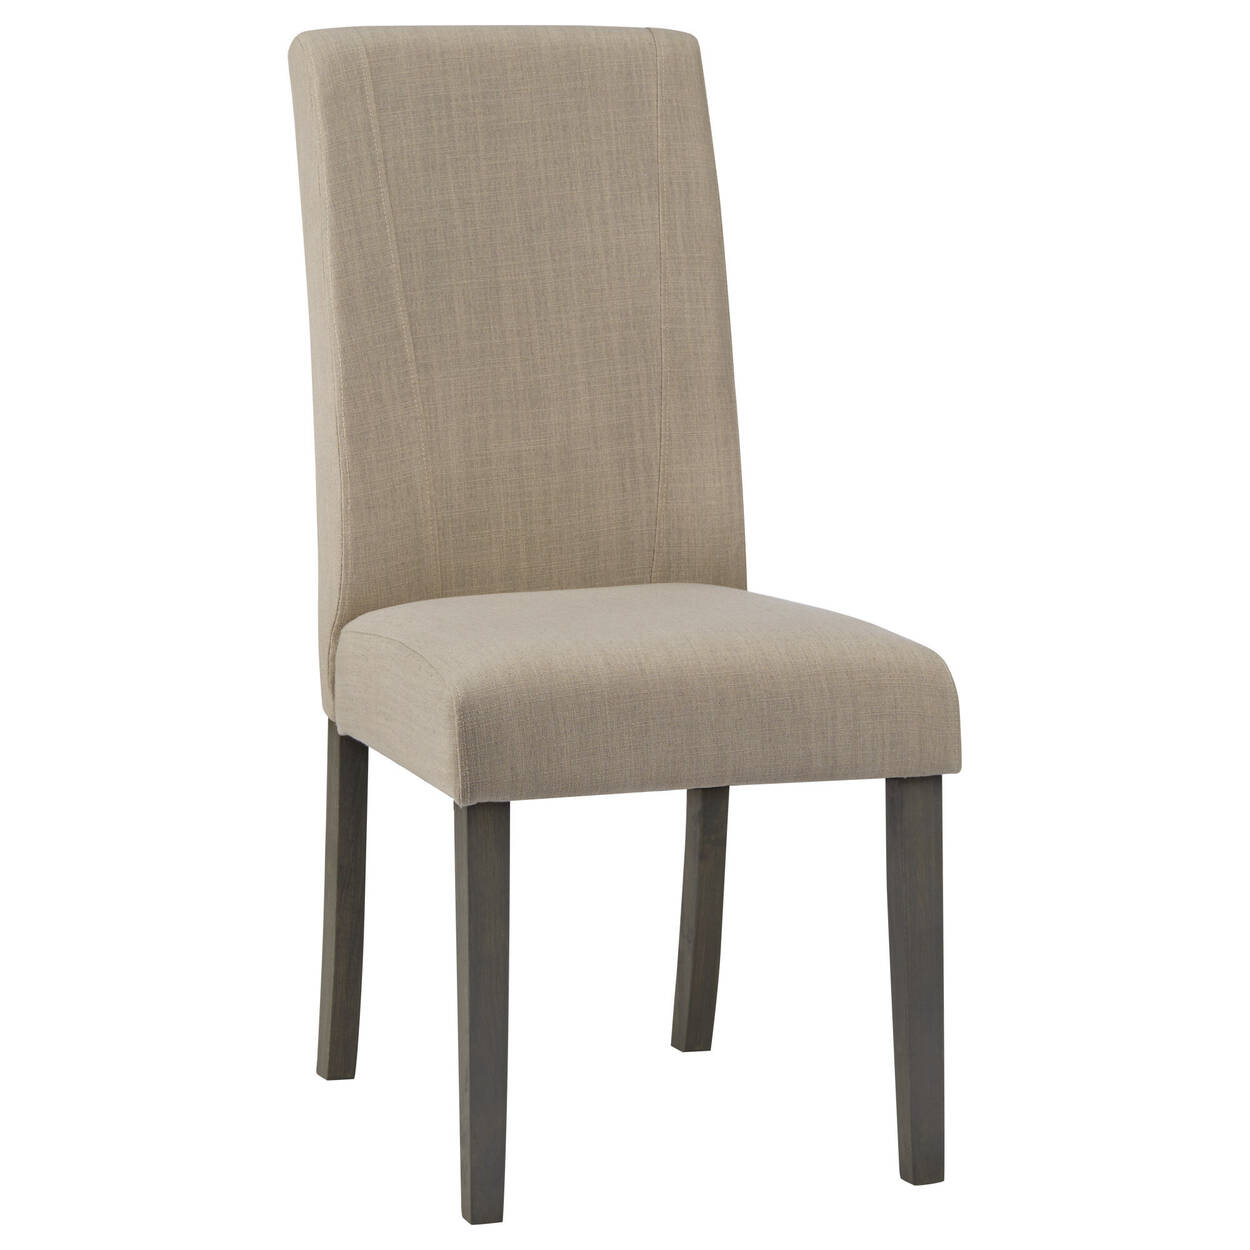 Fabric and Rubberwood Dining Chair | Bouclair.com